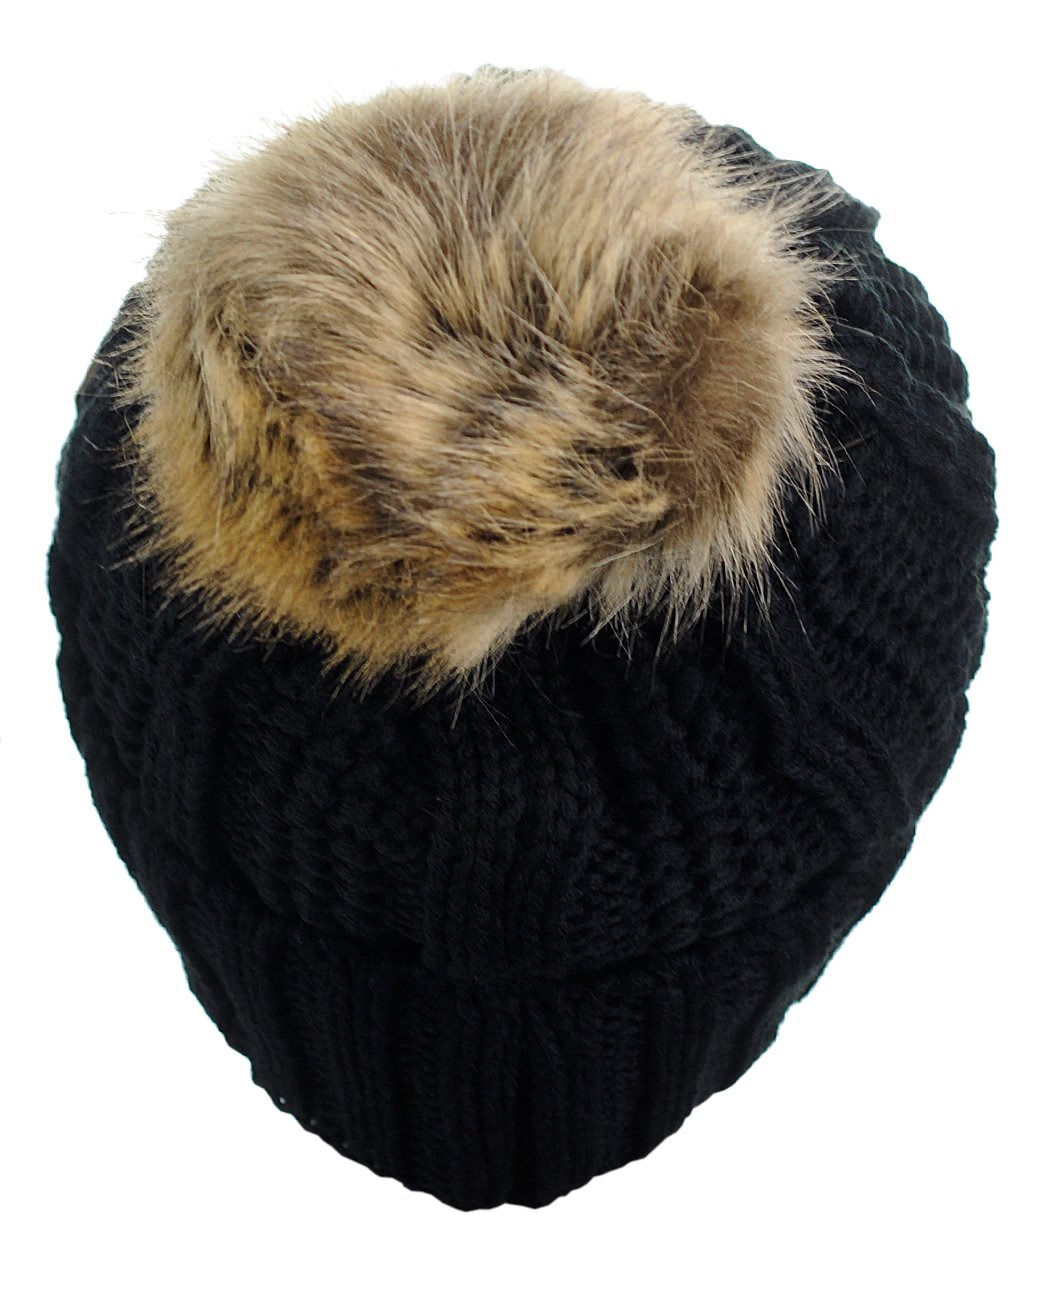 C.C Thick Cable Knit Faux Fuzzy Fur Pom Fleece Lined Skull Cap Cuff Beanie